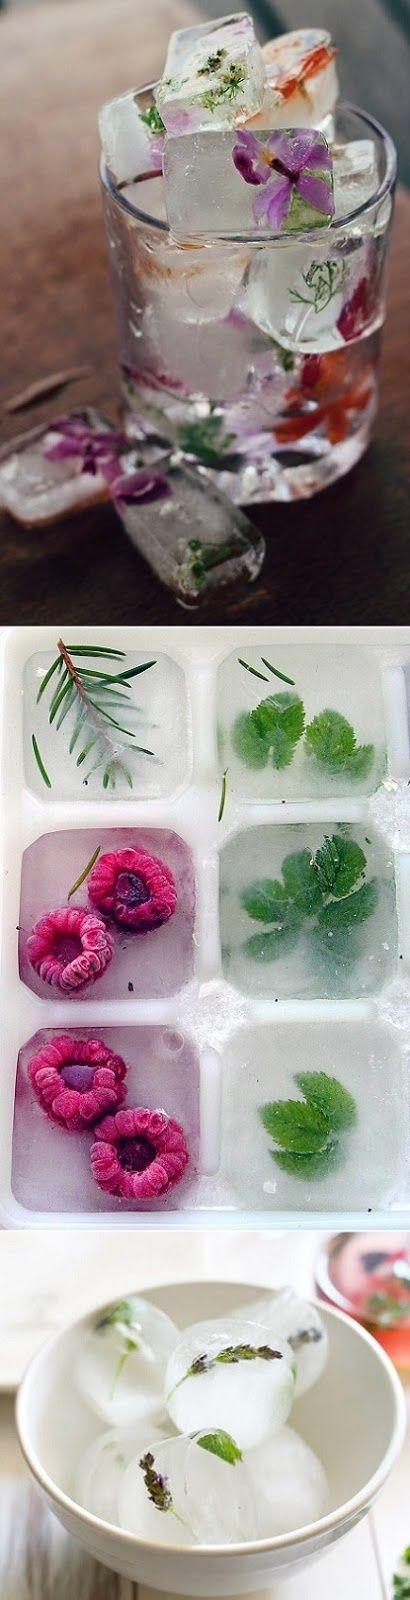 Hochzeit - How To Make Floral, Fruit, And Herb Ice Cubes